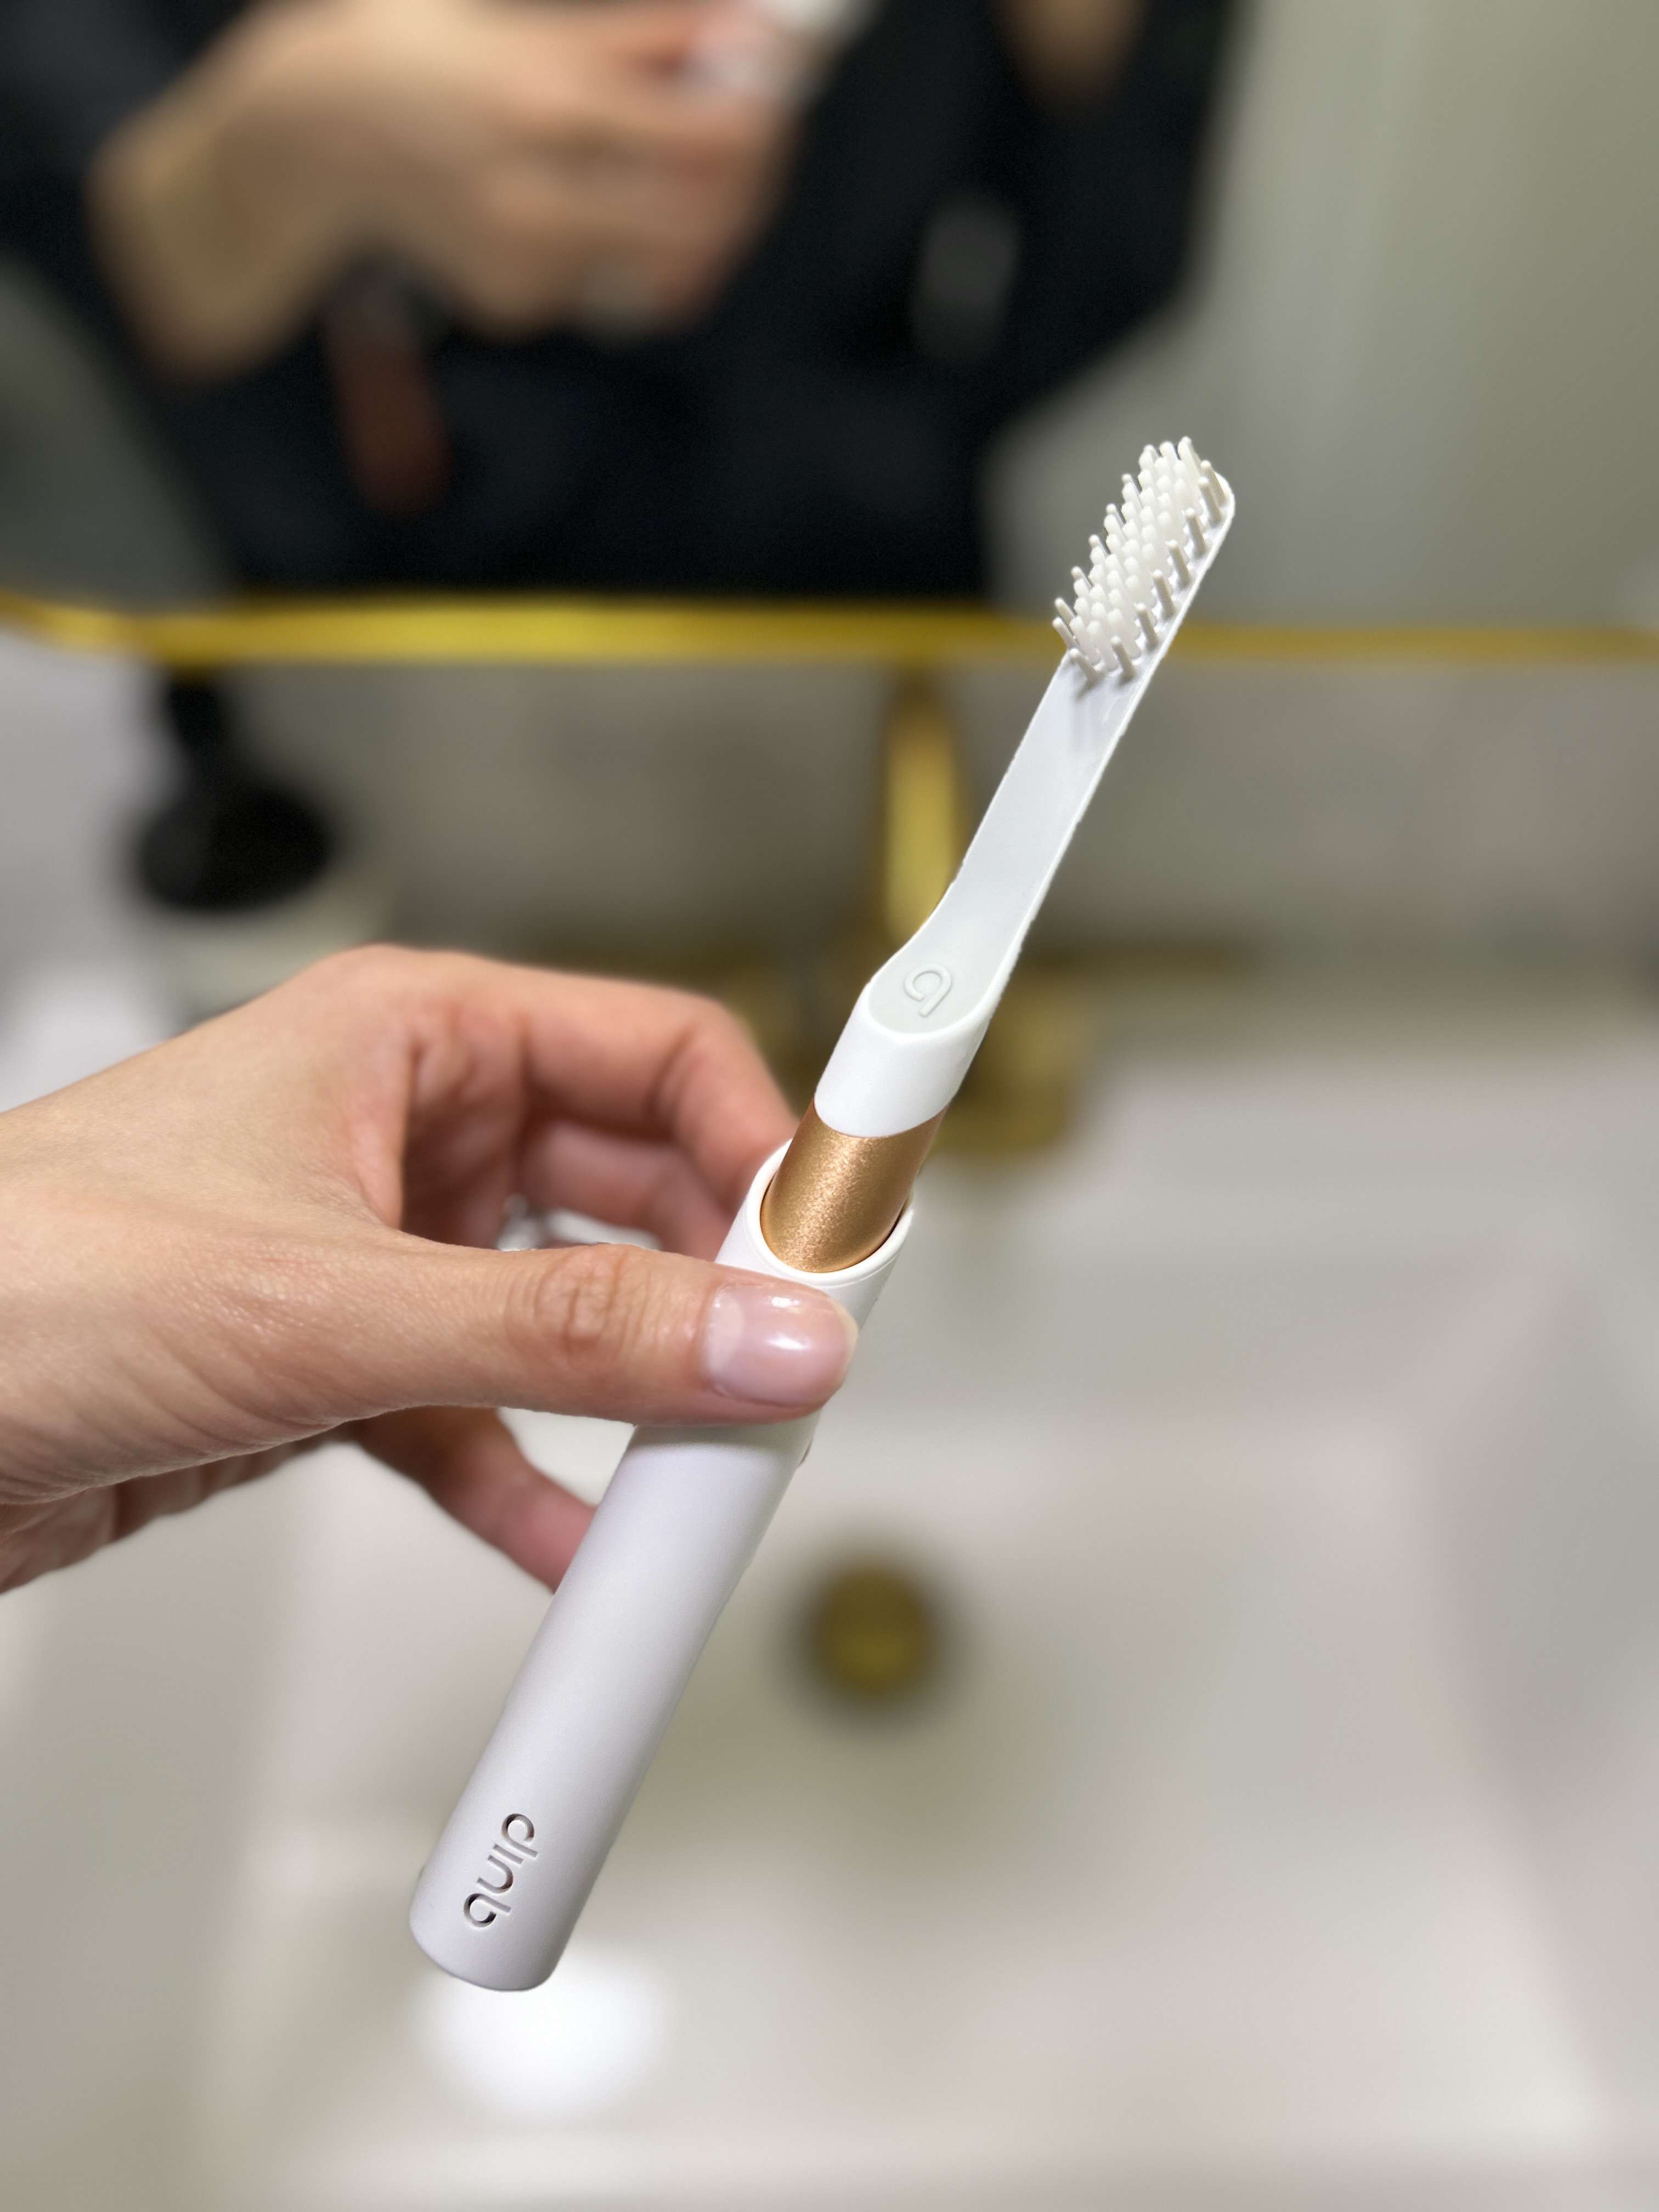 I Didn’t Think An Electric Toothbrush or Water Flosser Could Be Convenient For Travel – Here’s What Happened When I Tried quip